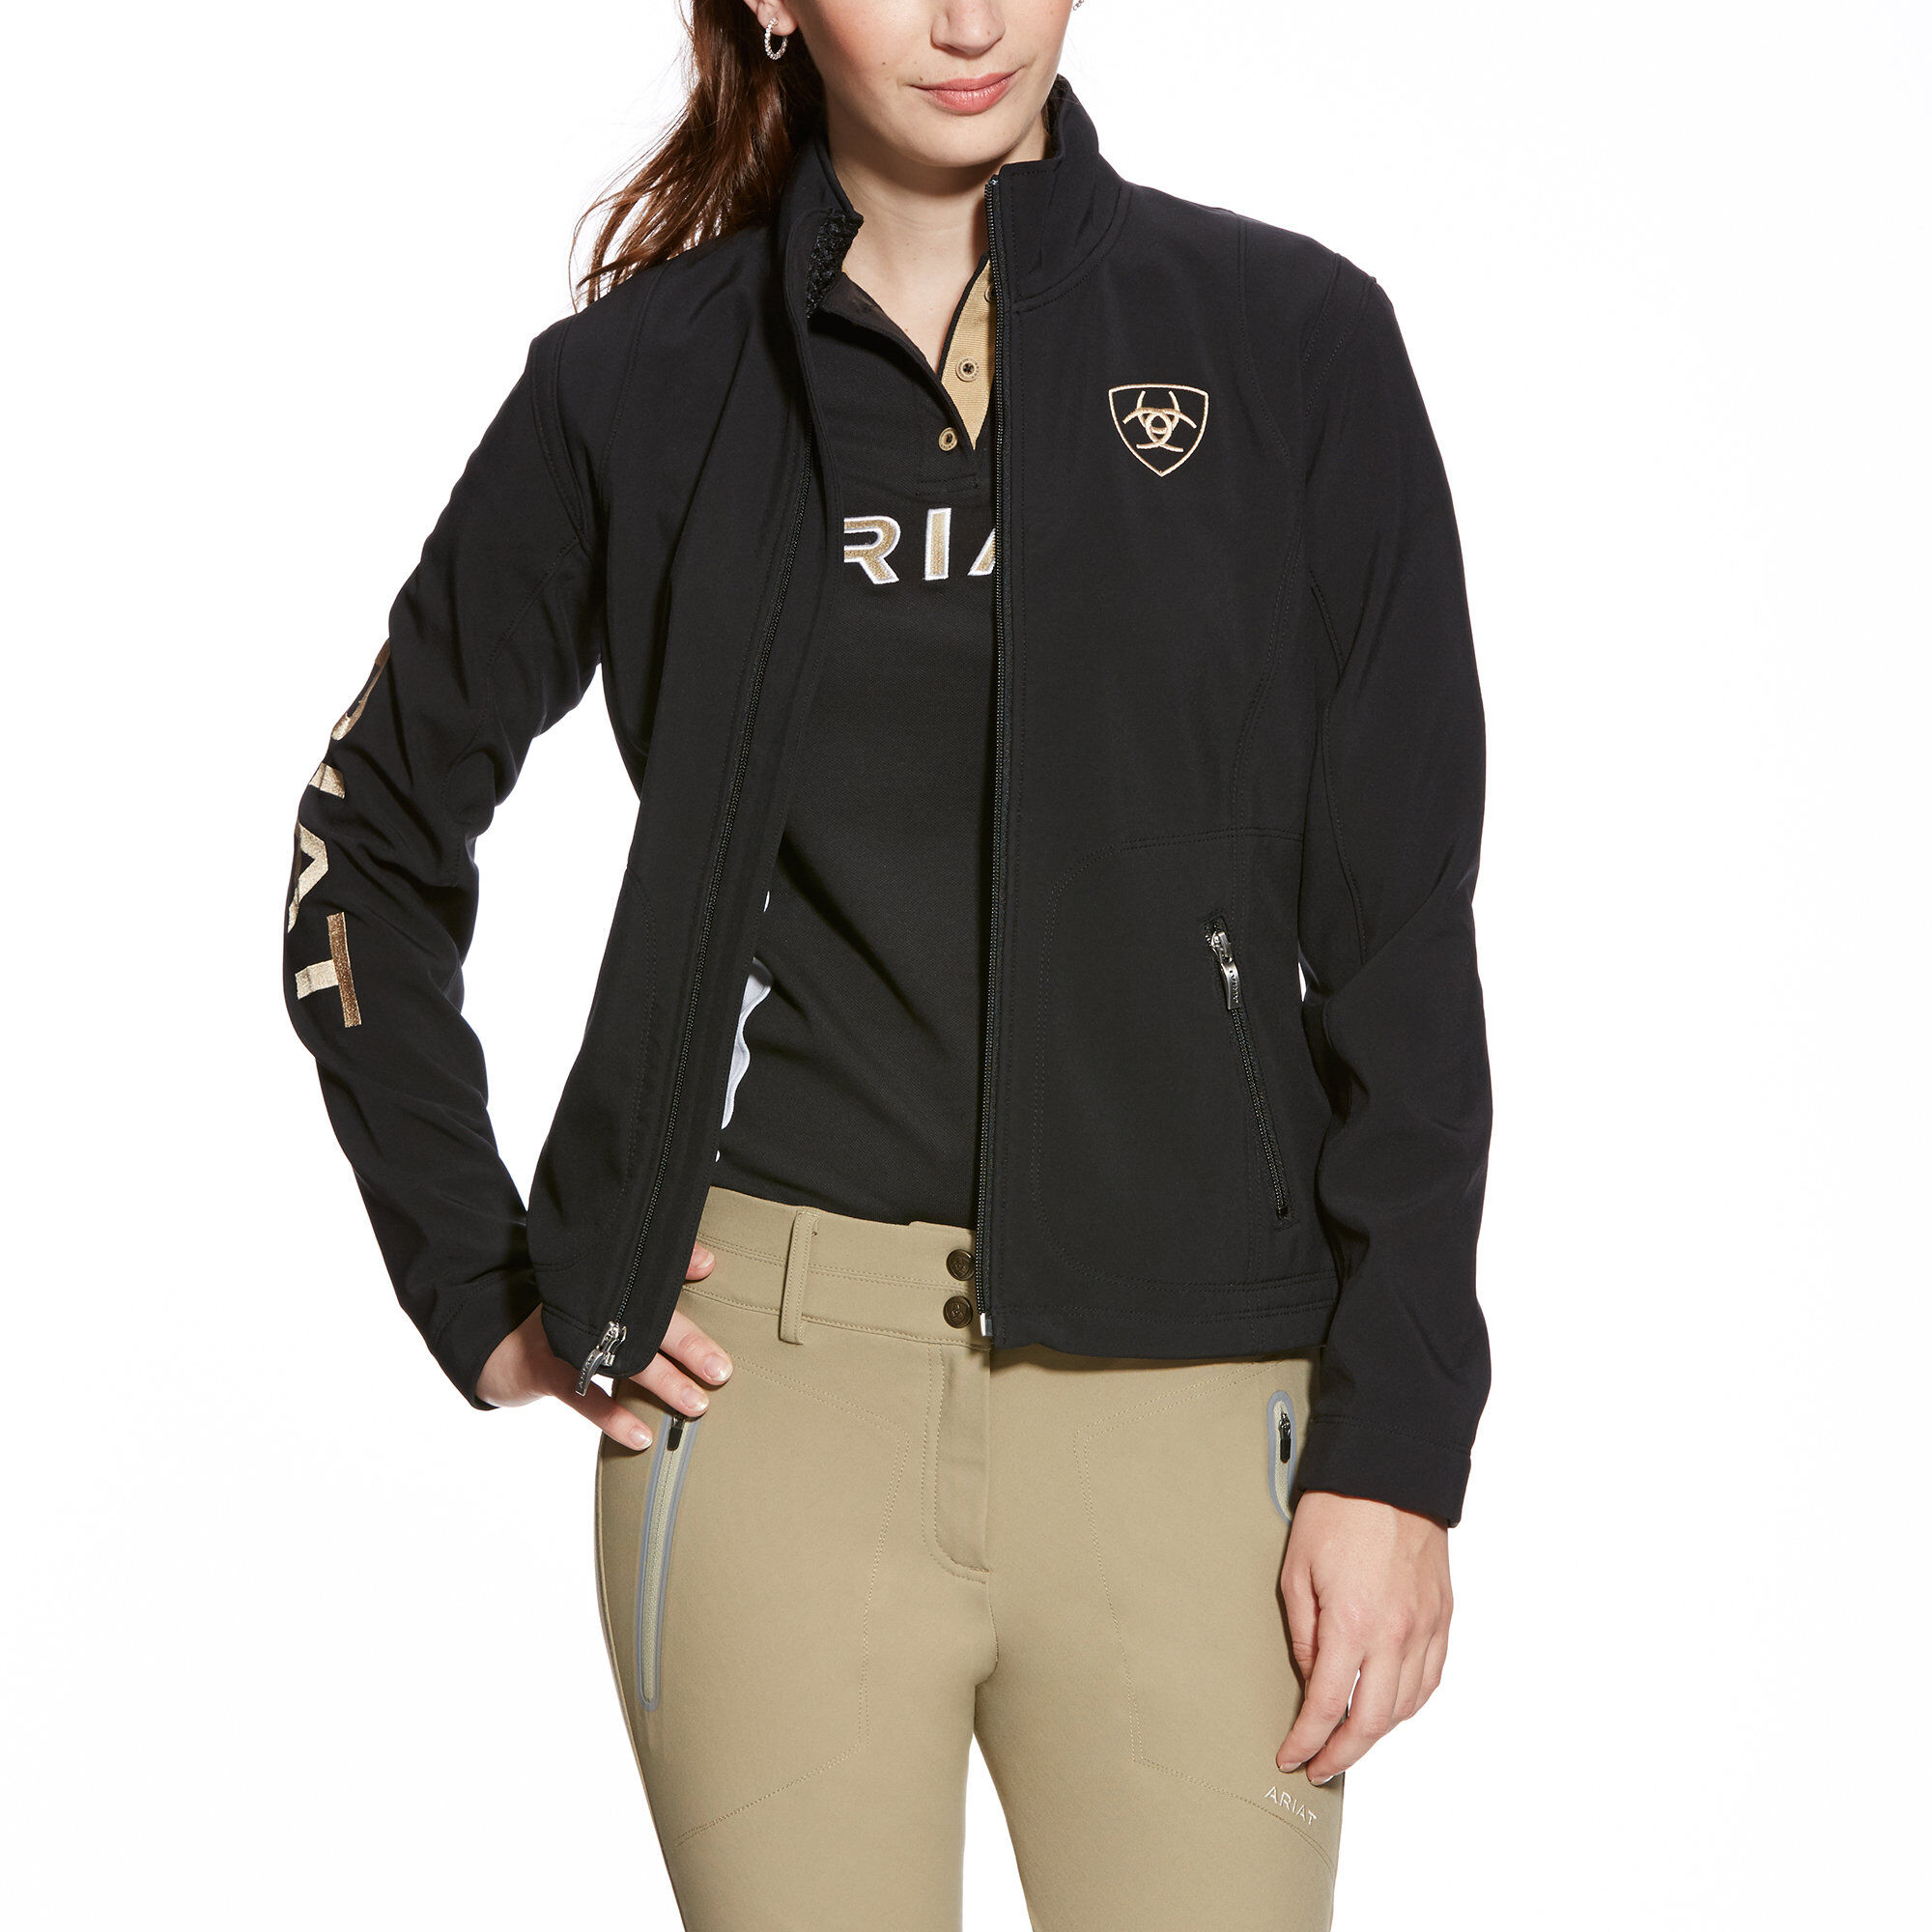 Ariat Womens Hybrid Insulated Water Resistant Team Jacket 